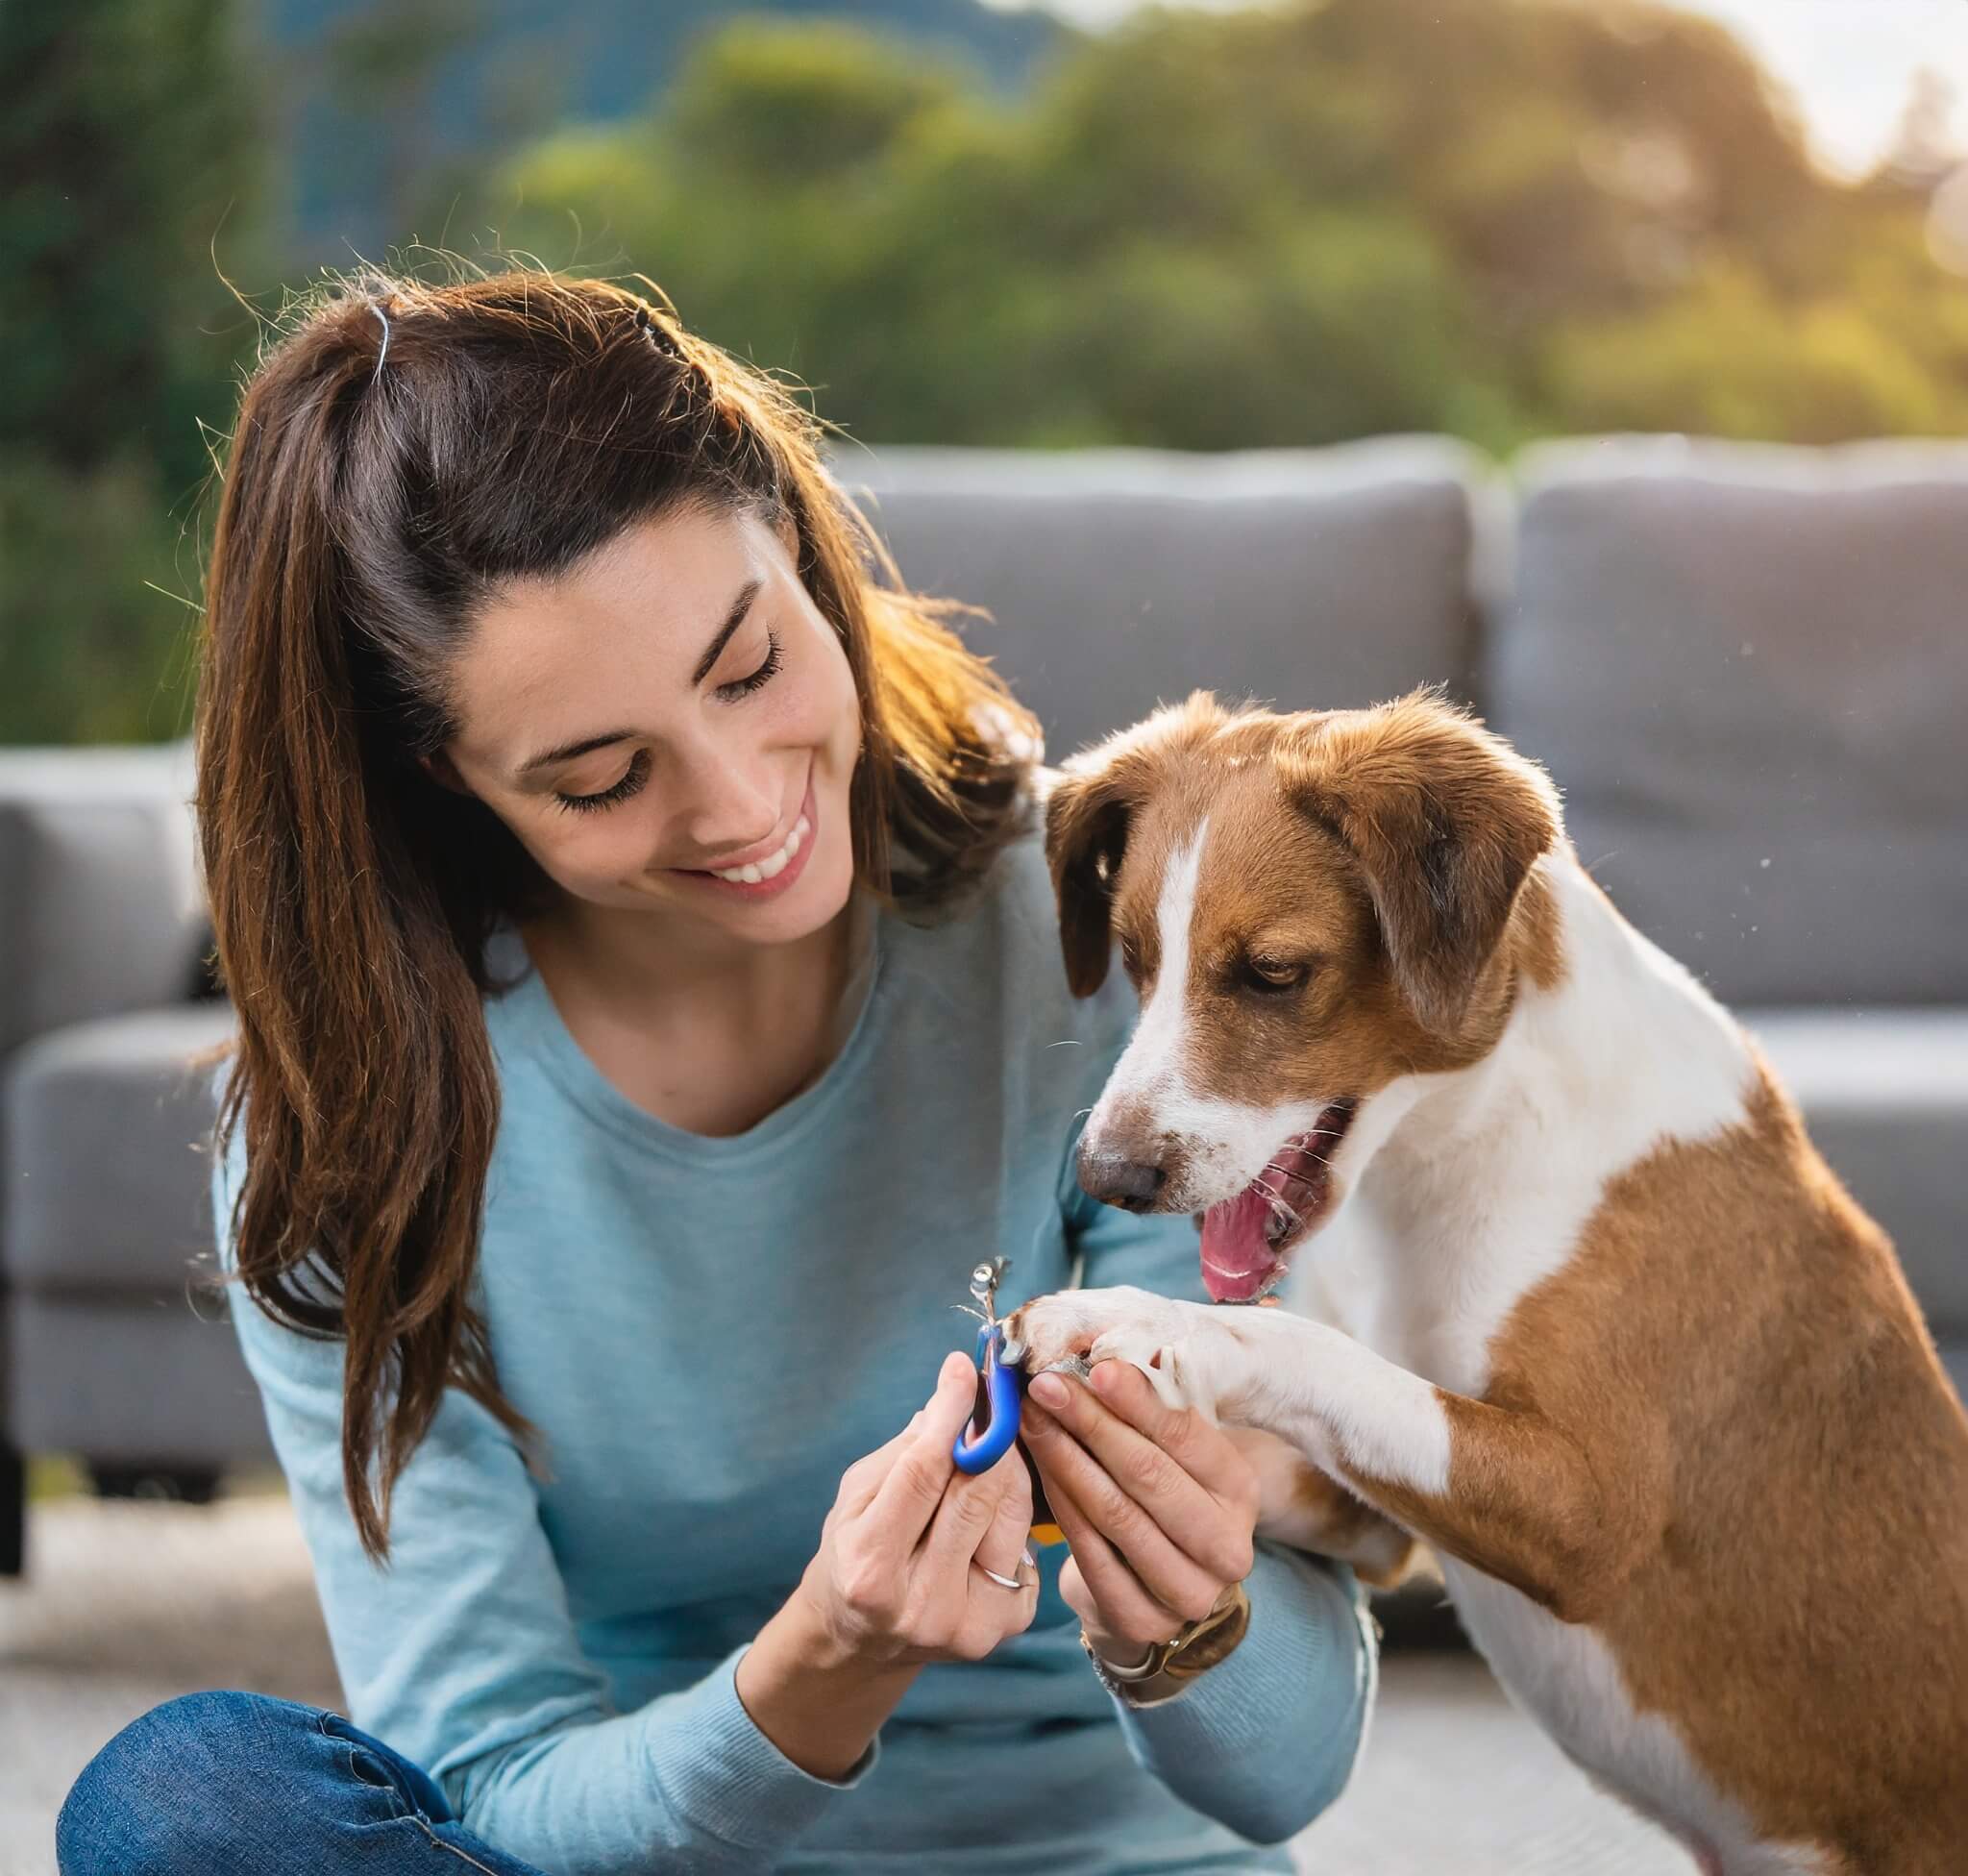 How to Trim Your Dog's Nails Safely at Home